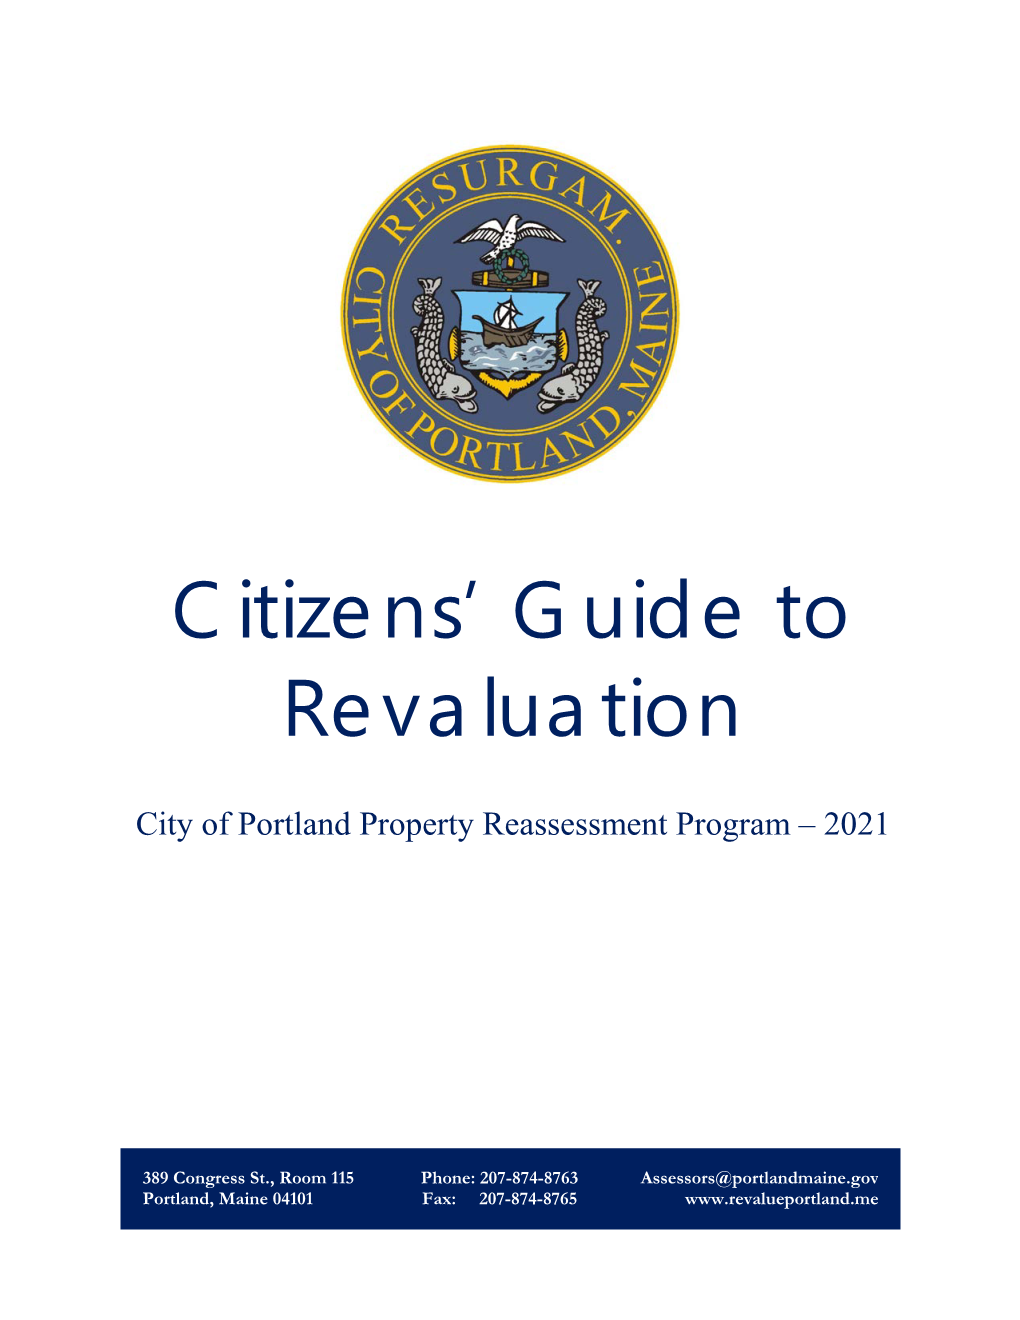 Citizens' Guide to Revaluation